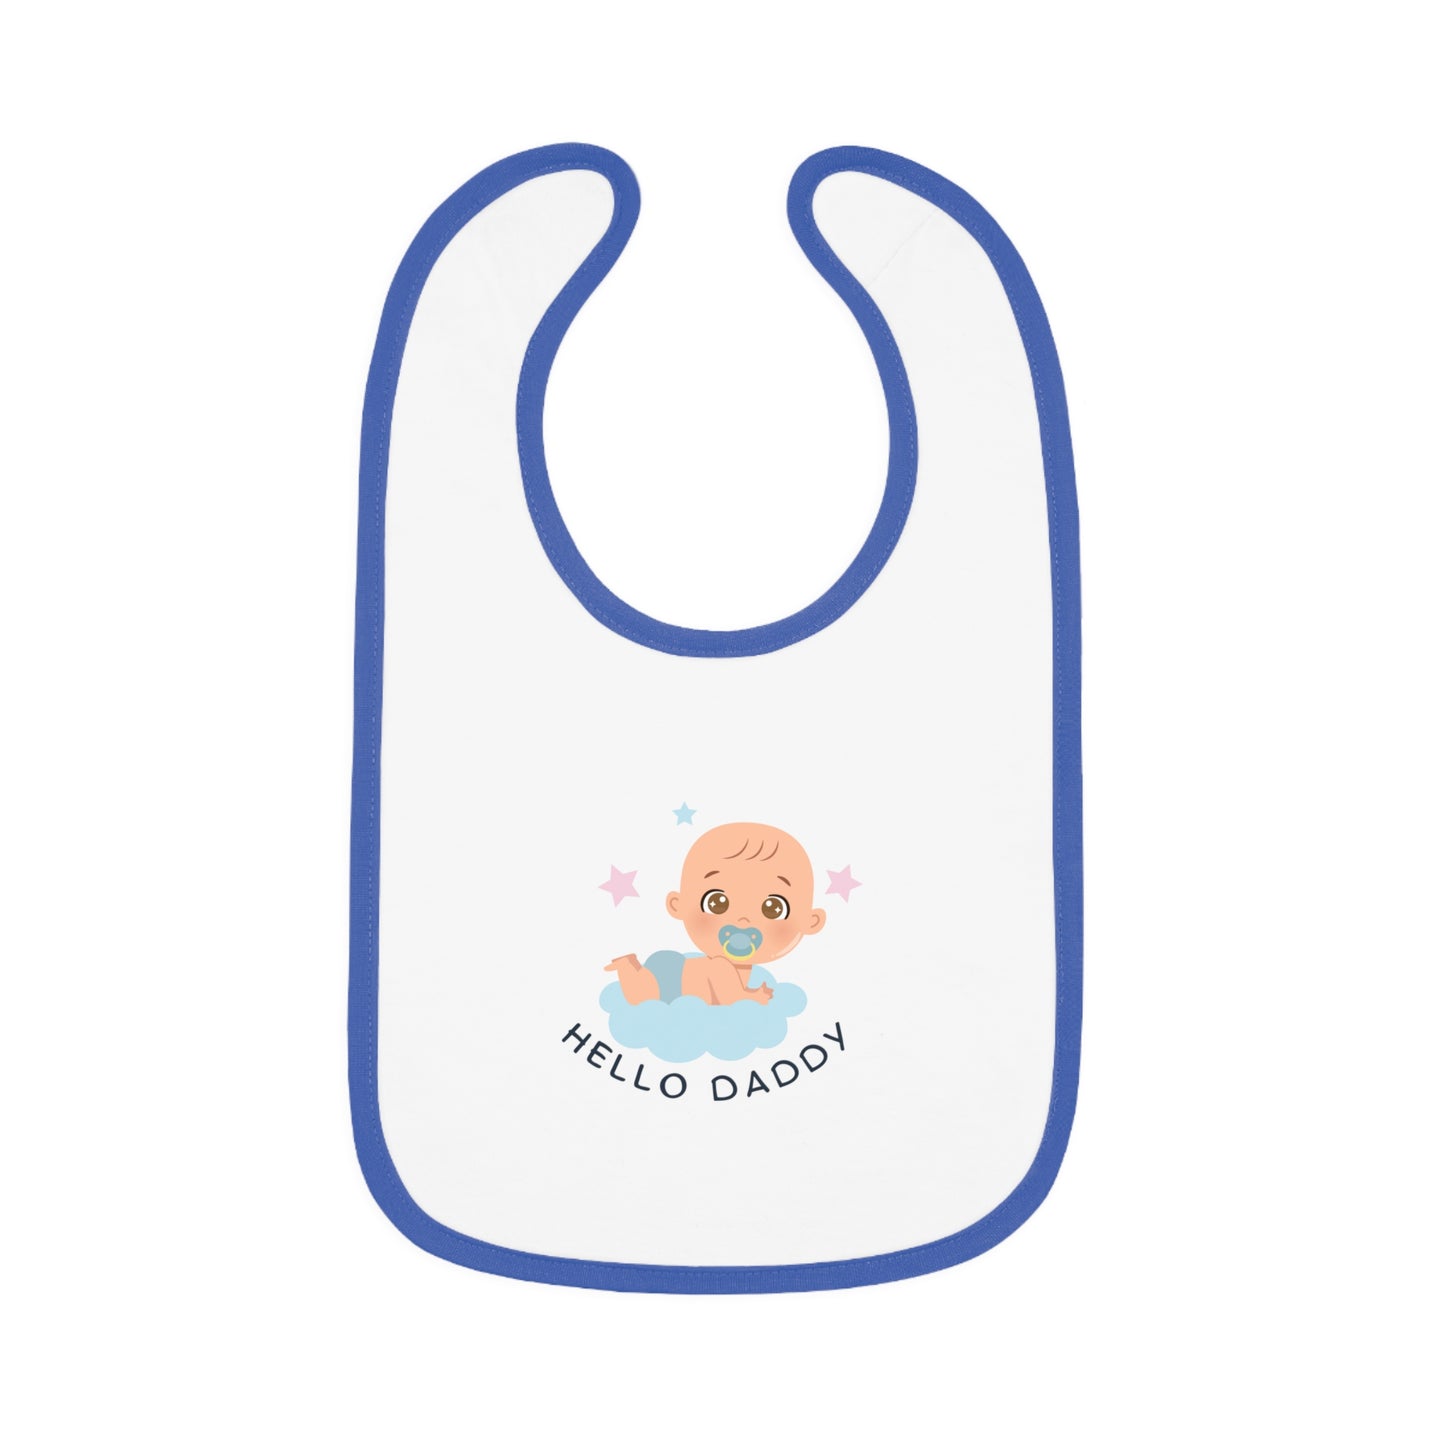 Adorable Baby & Kid Apparel Featuring the Playful 'Hello Daddy' Contrast Trim Jersey Bib – Perfect for Cherished Moments and Smiles Galore!"